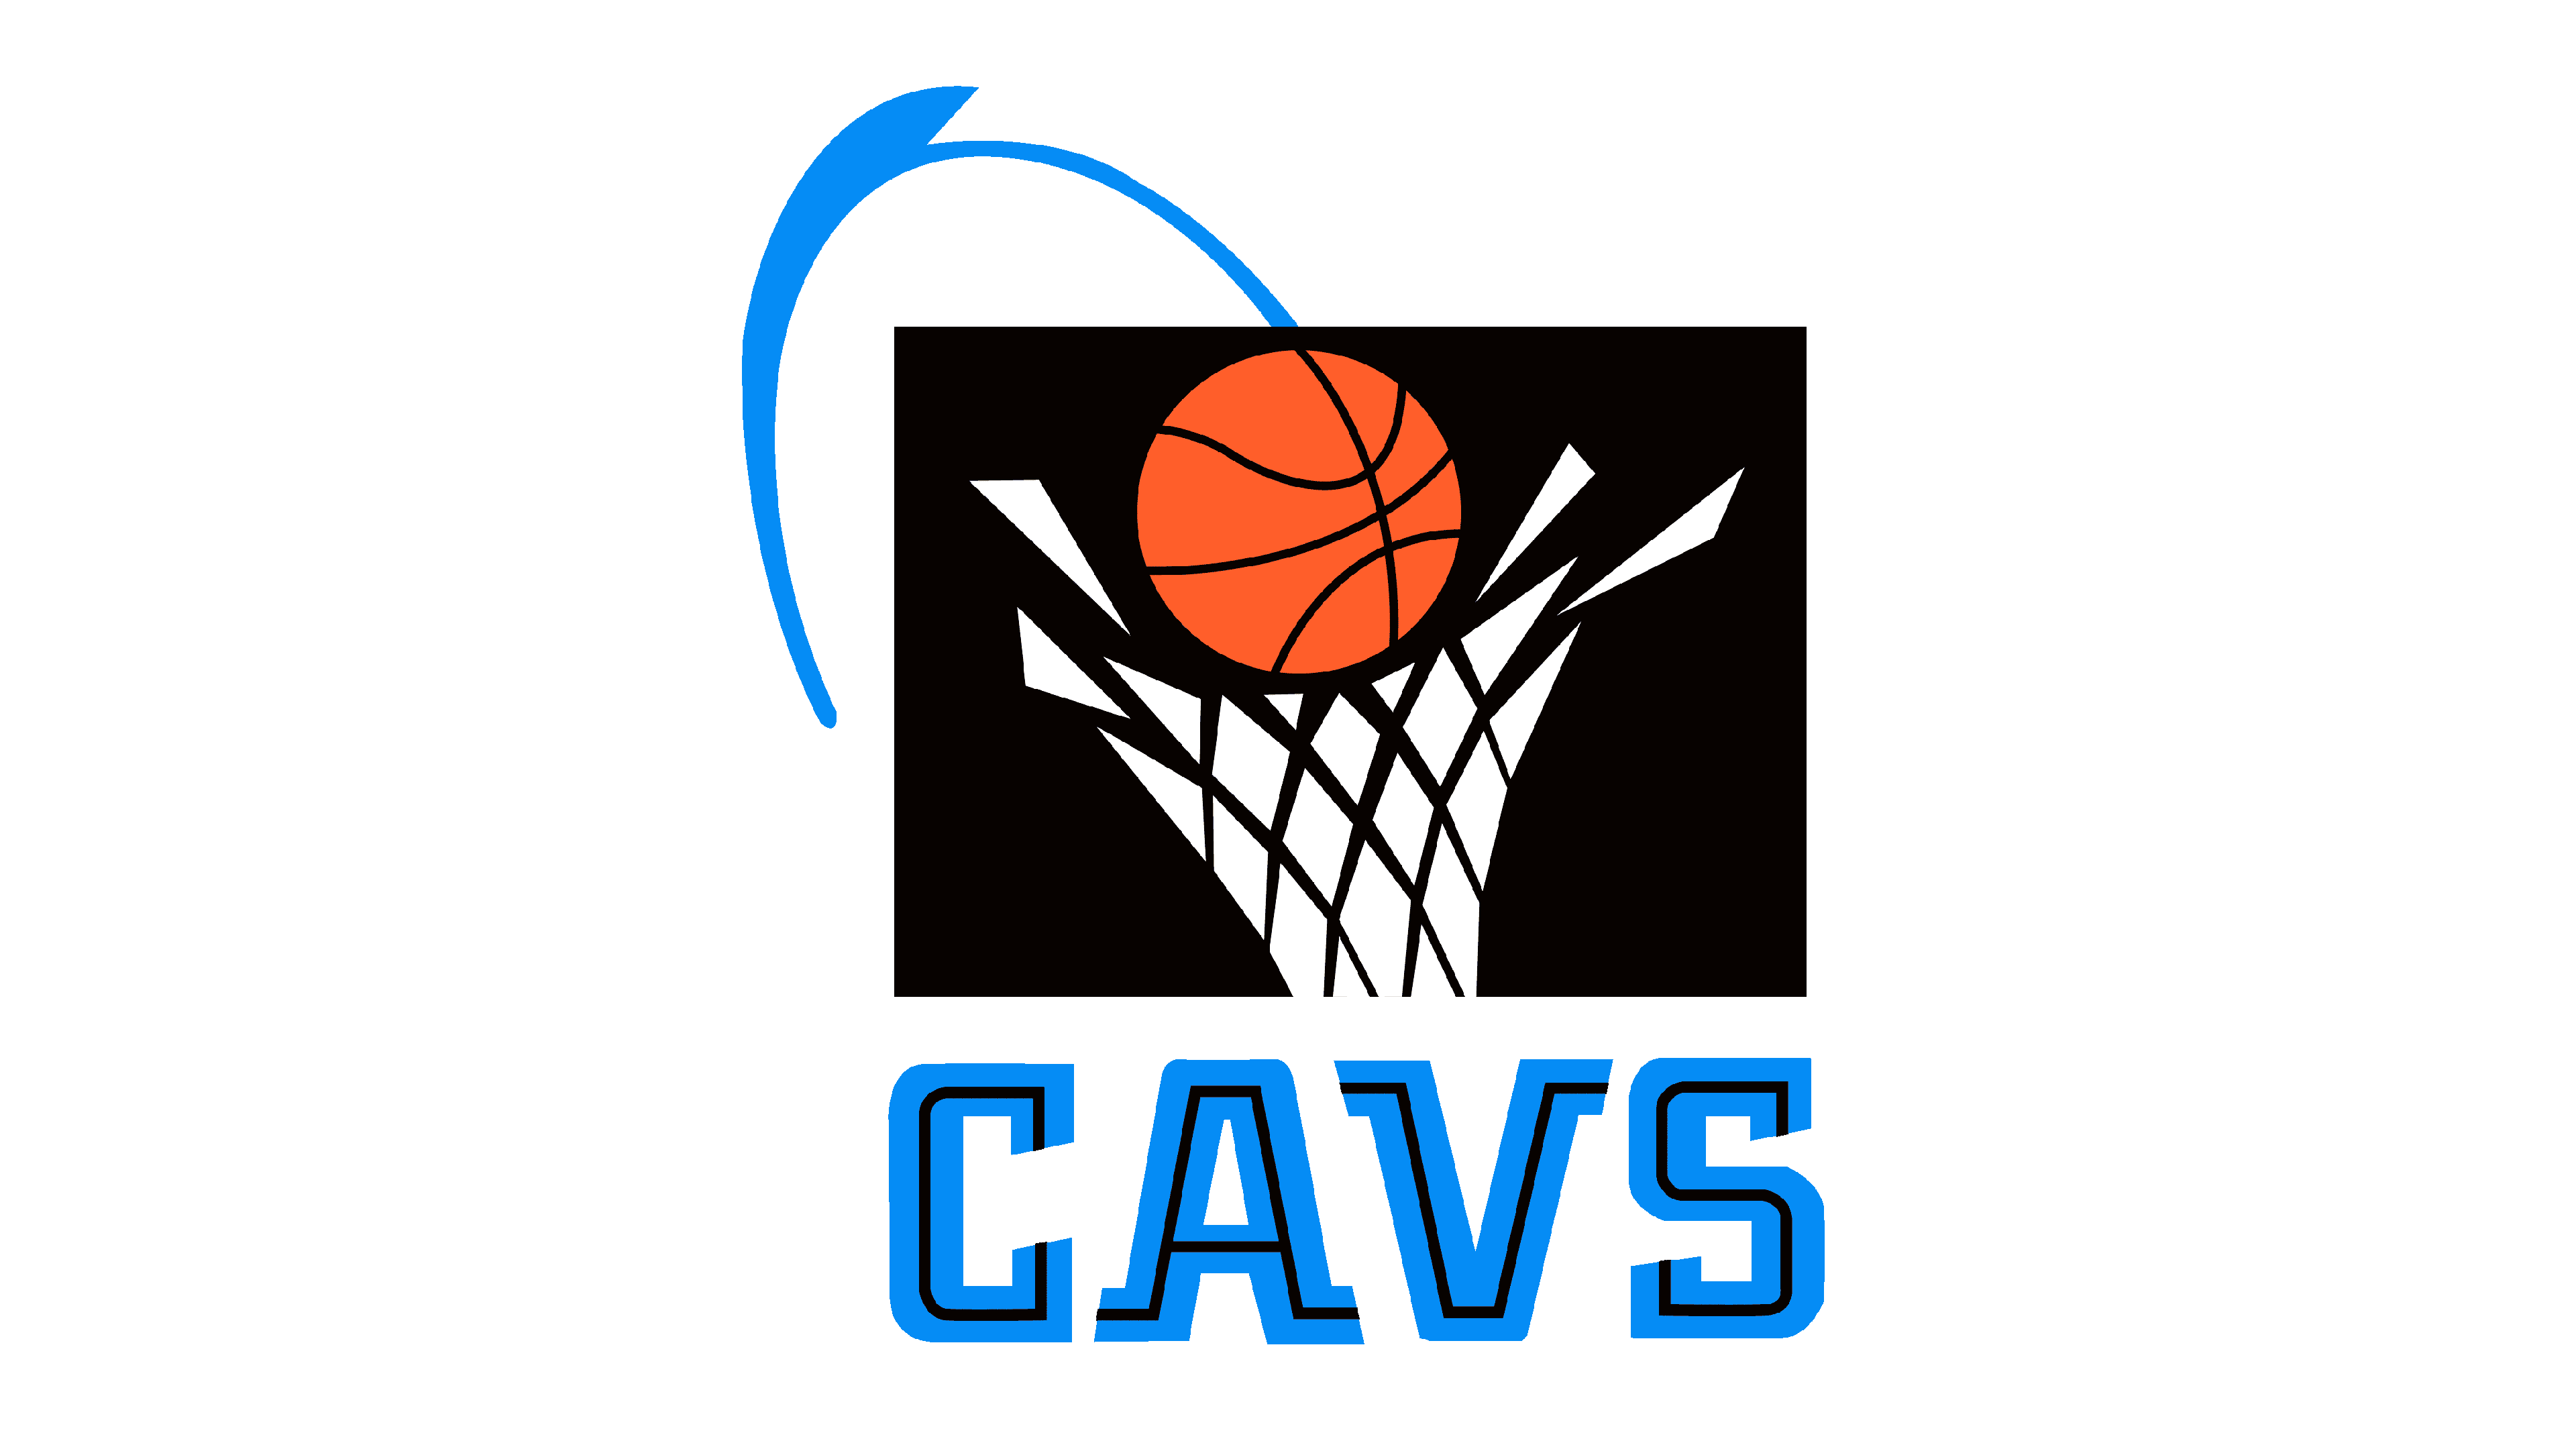 Cleveland Cavaliers update logos to reflect hues in history